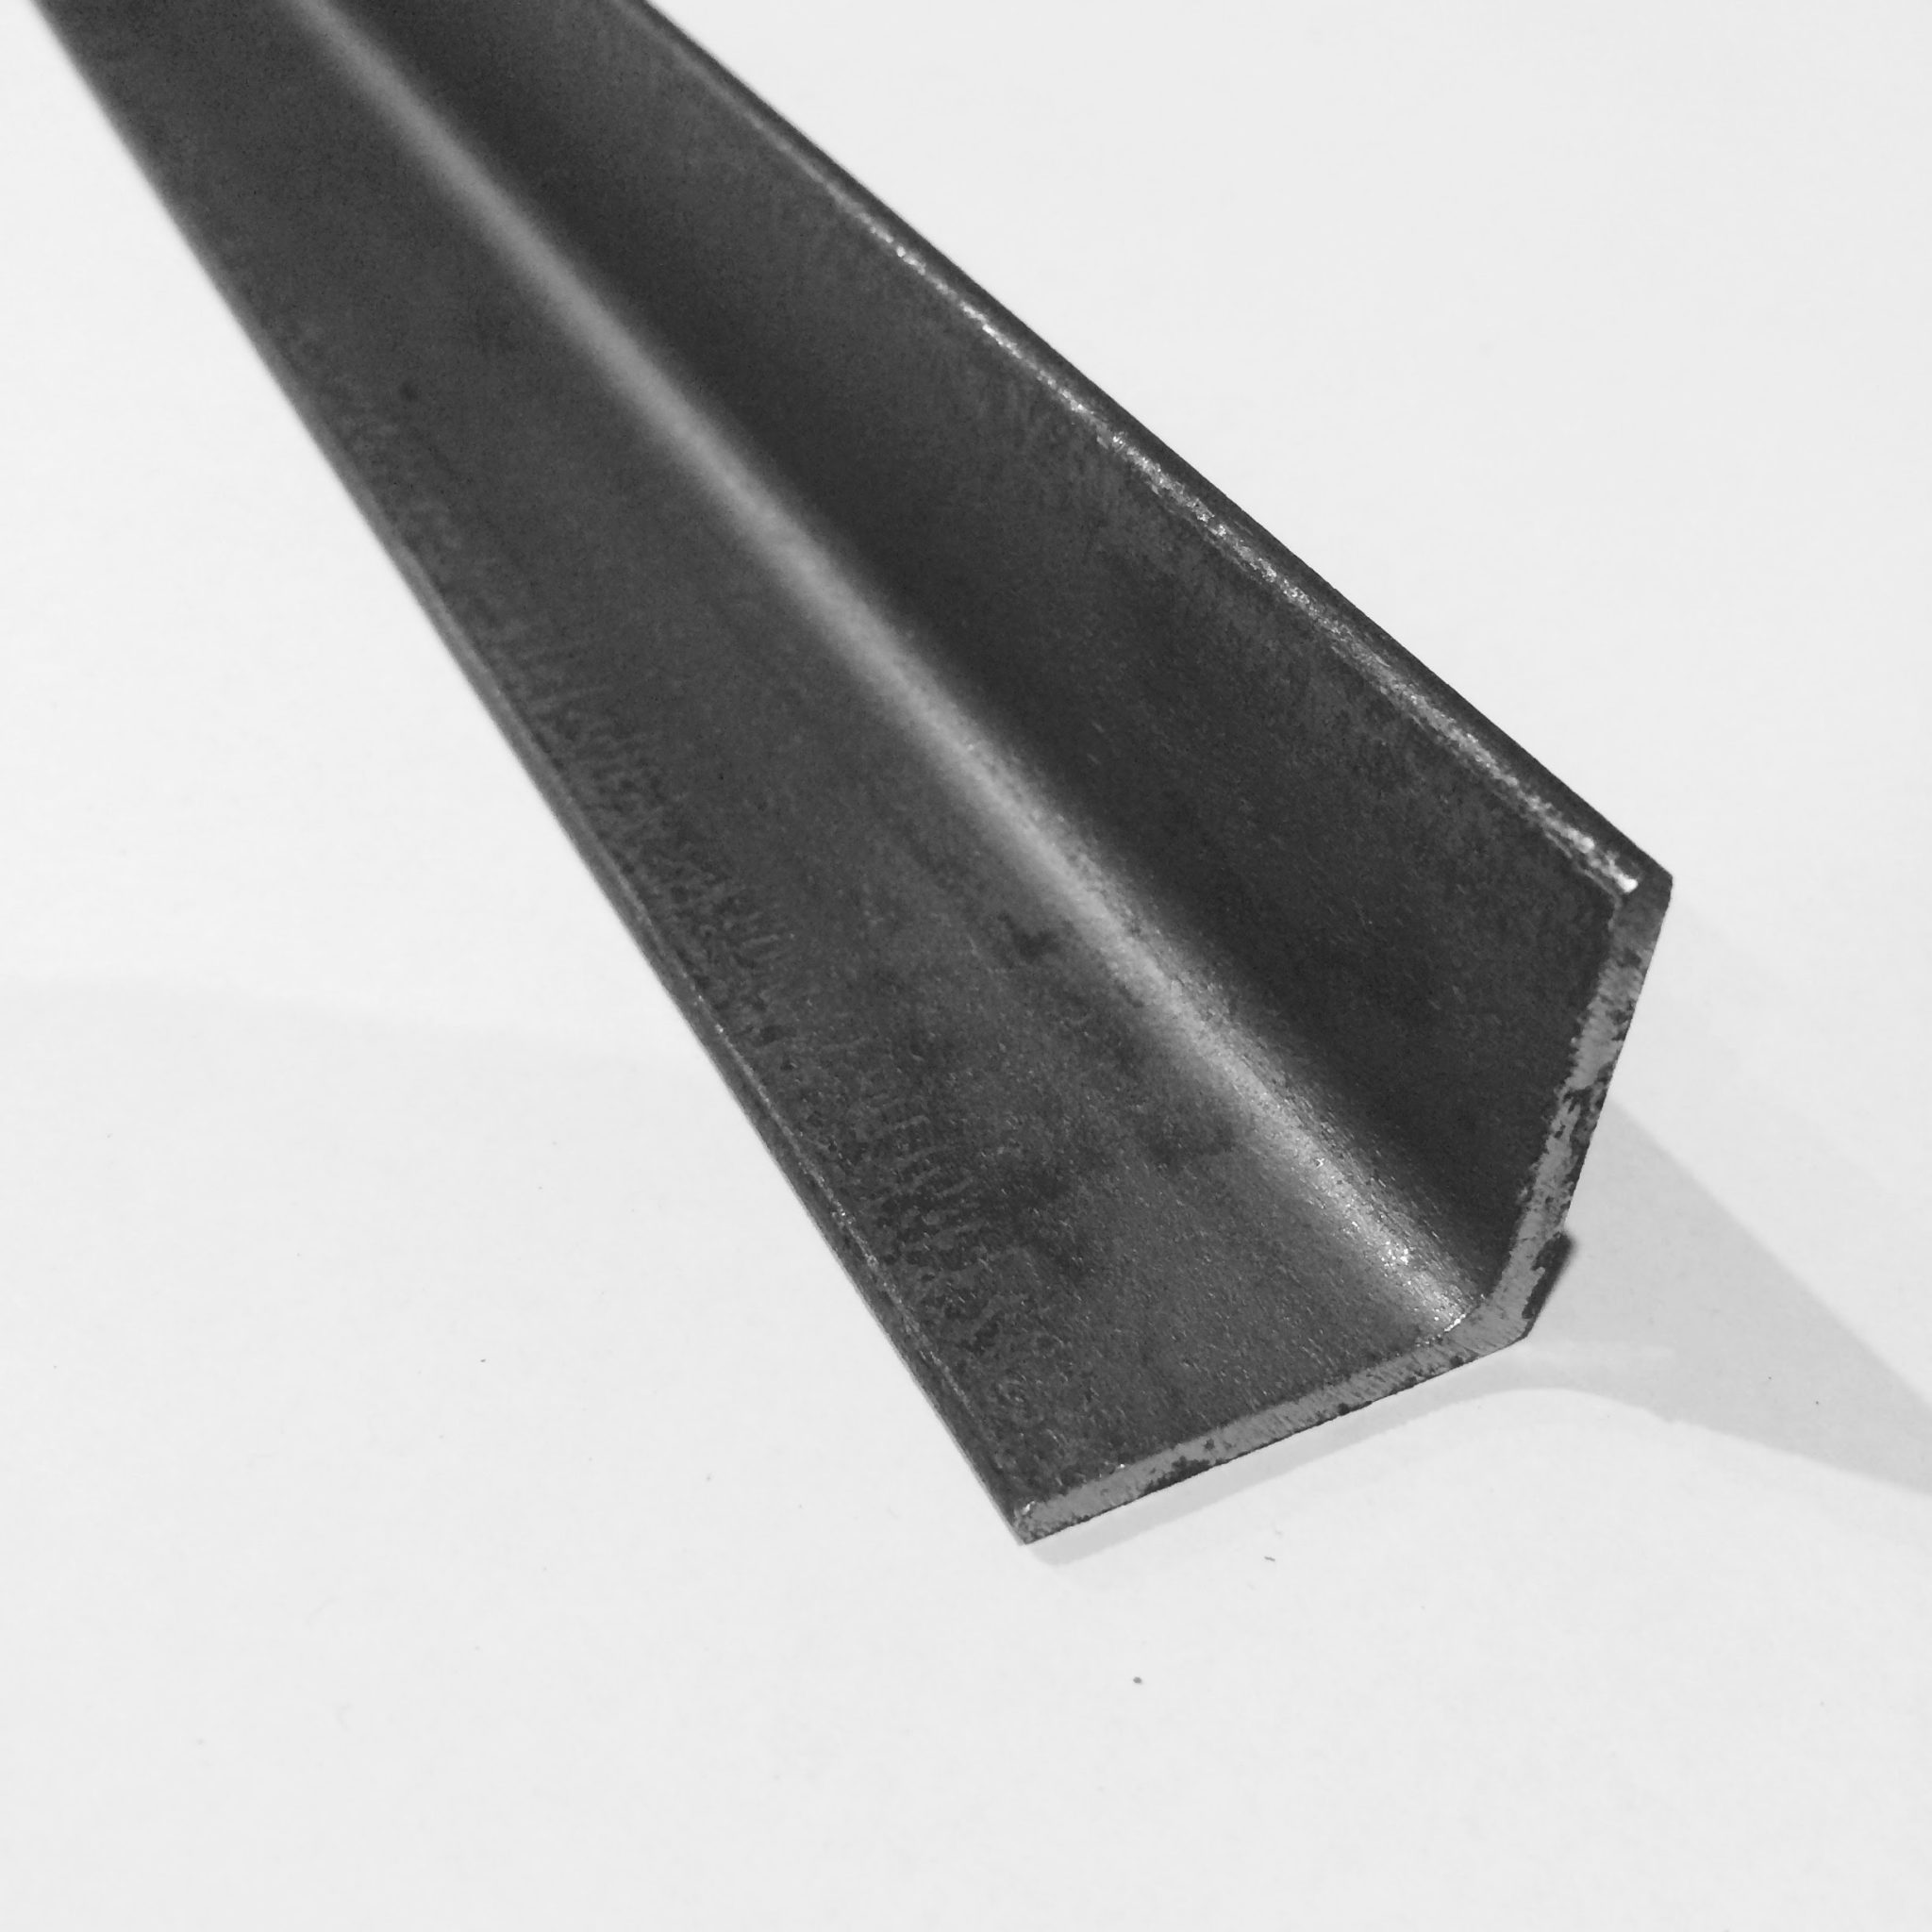 MILD STEEL EQUAL ANGLE BAR METAL SECTION 3-5mm THICK 3x13x13mm 13-50mm WIDTH ALL SIZES 